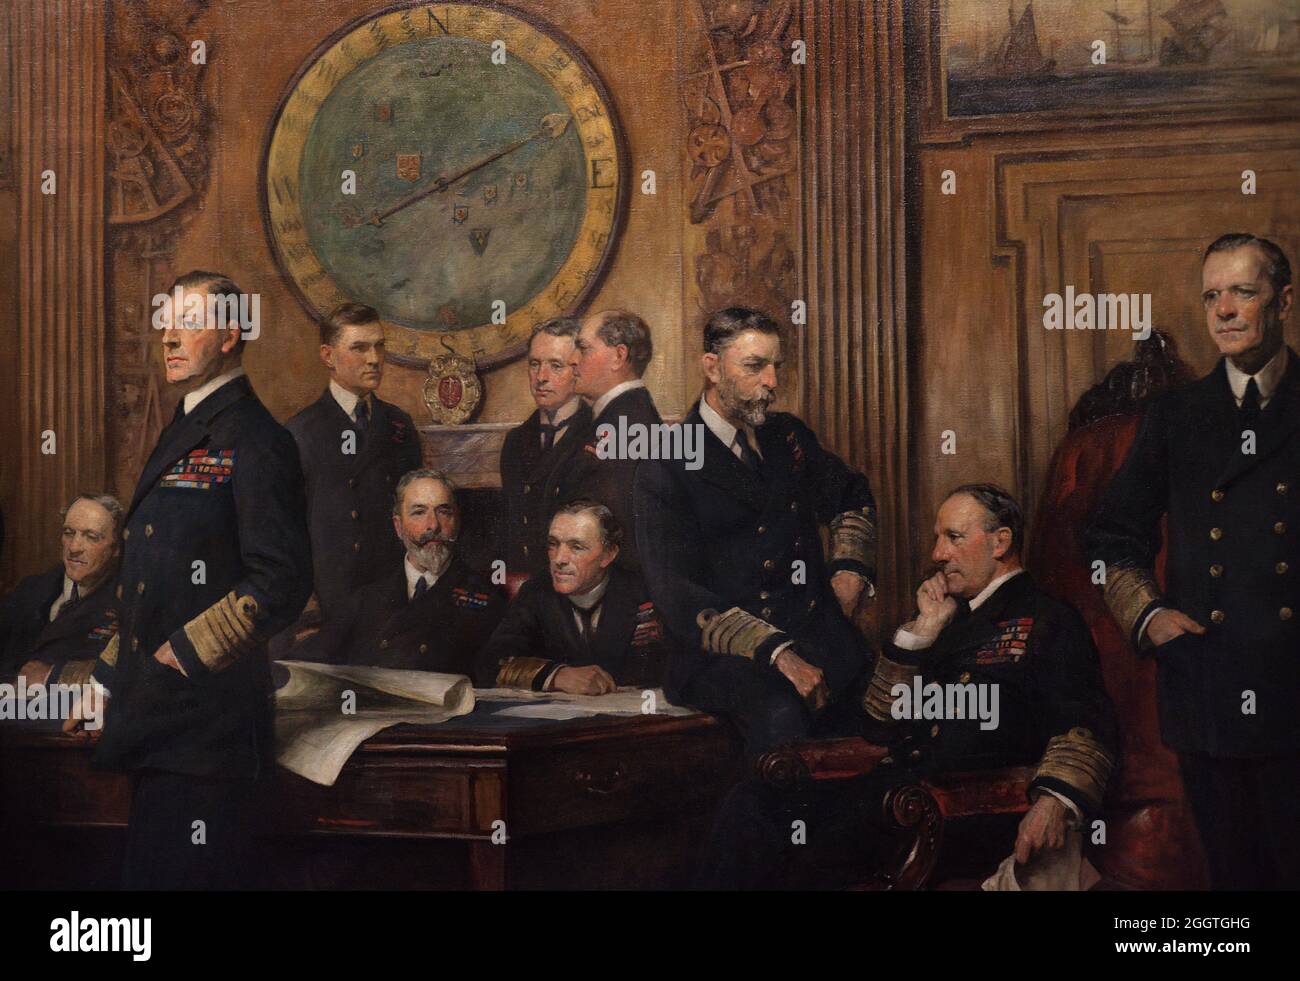 Naval Officers of World War I. Painting by Arthur Stockdale Cope (1857-1940). Oil on canvas (264,1 x 514,4 cm), 1921. Detail. National Portrait Gallery. London, England, United Kingdom. Stock Photo